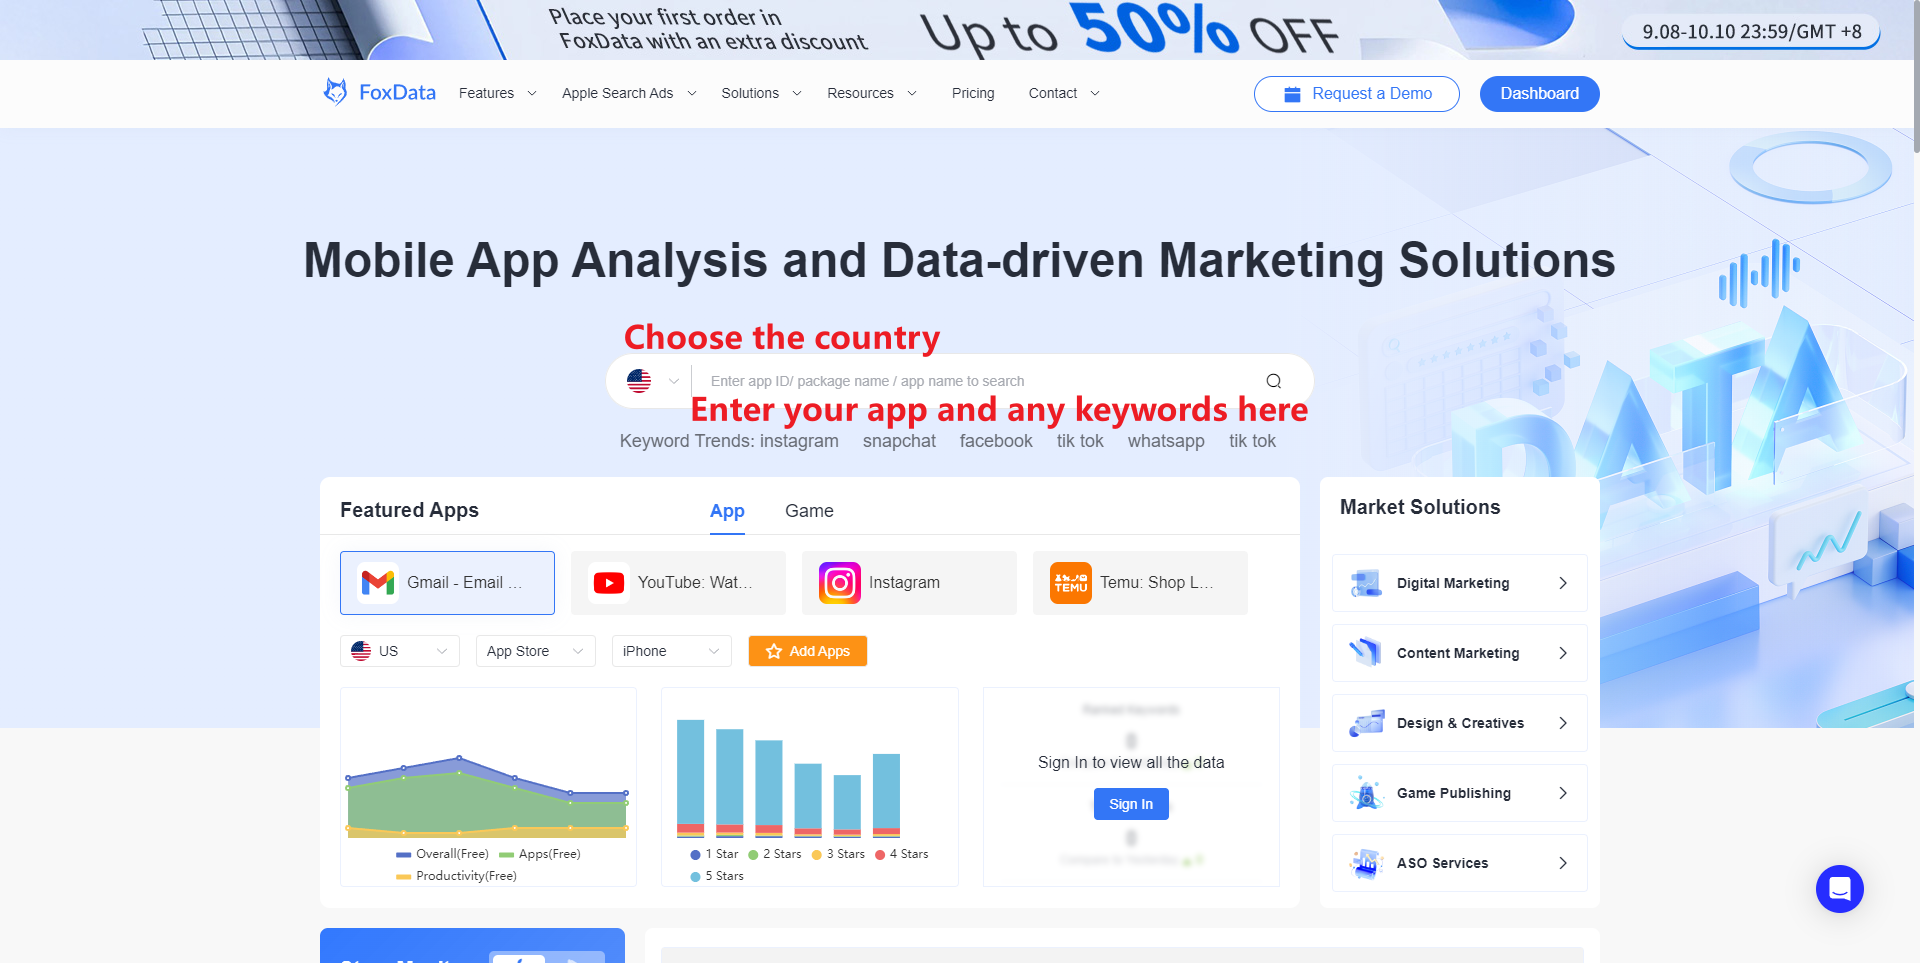 Mobile App Analysis and Data-driven Marketing Solutions